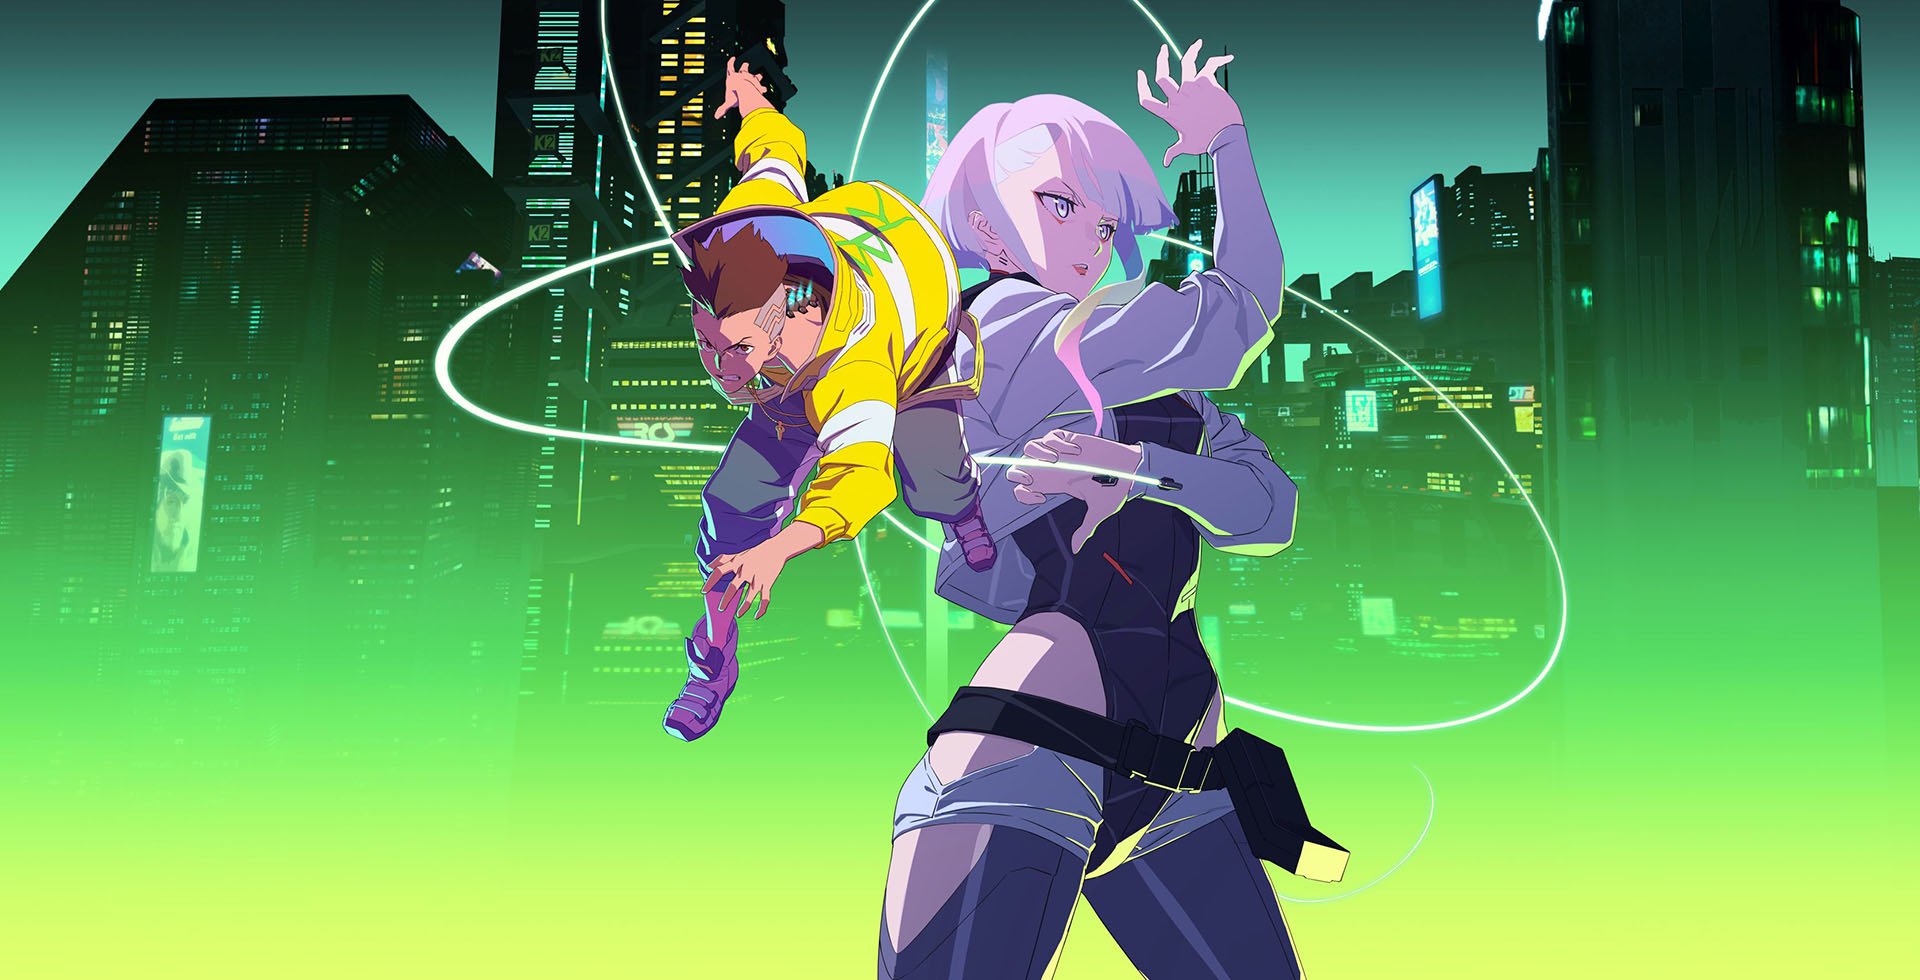 The Official Trailer For Cyberpunk Edgerunners An Anime Set In The